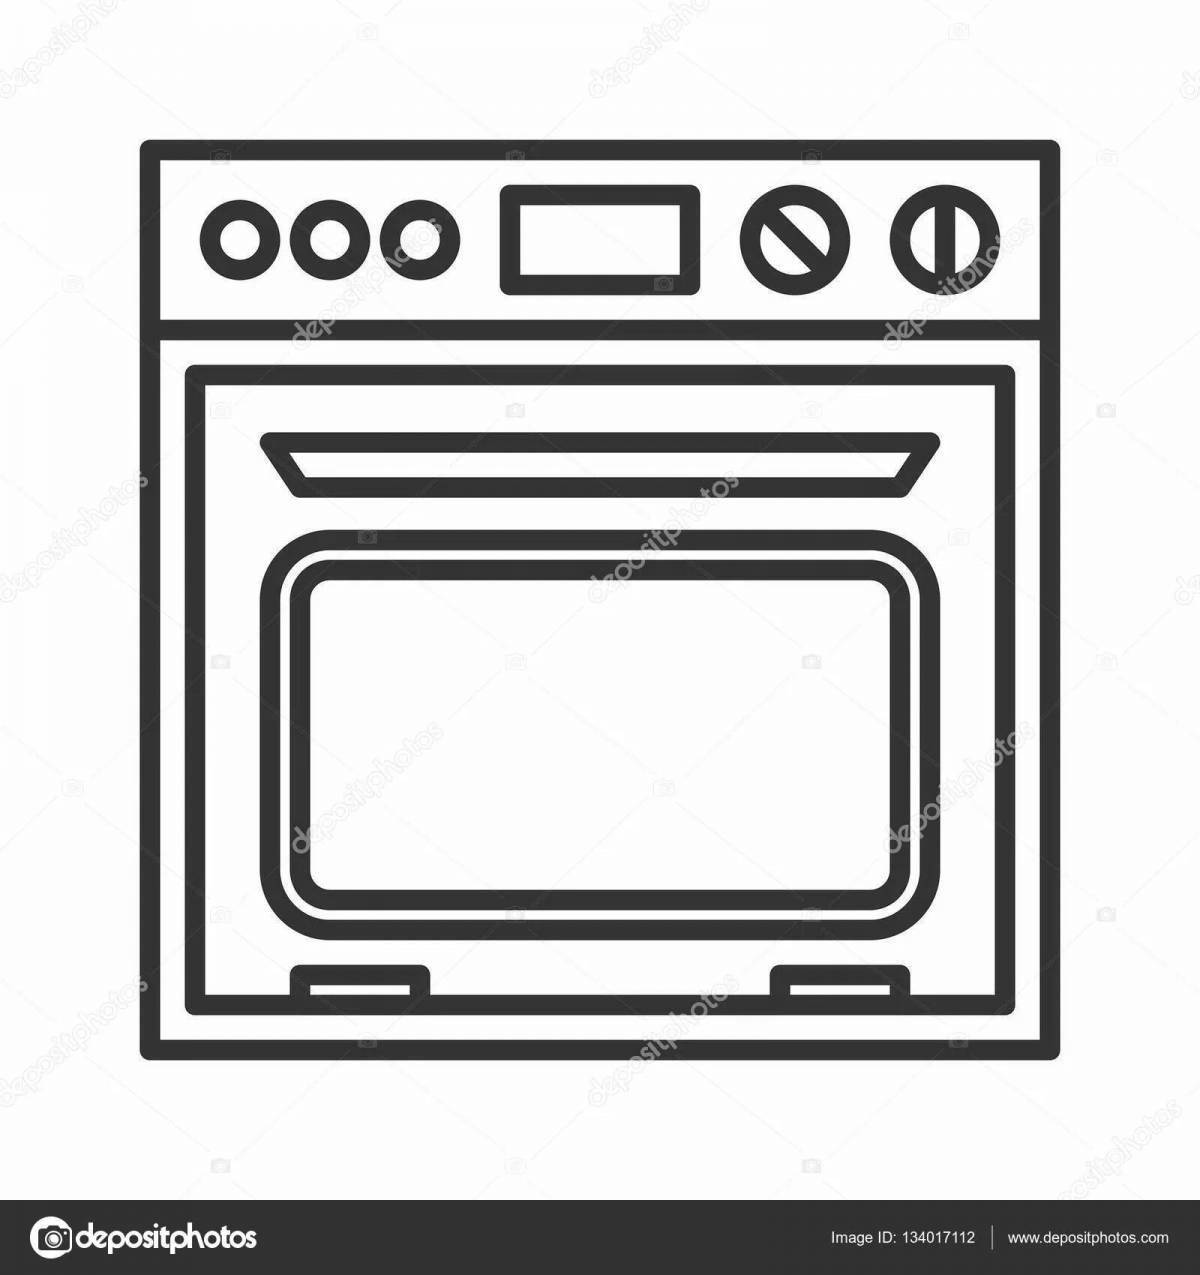 Magic oven coloring page